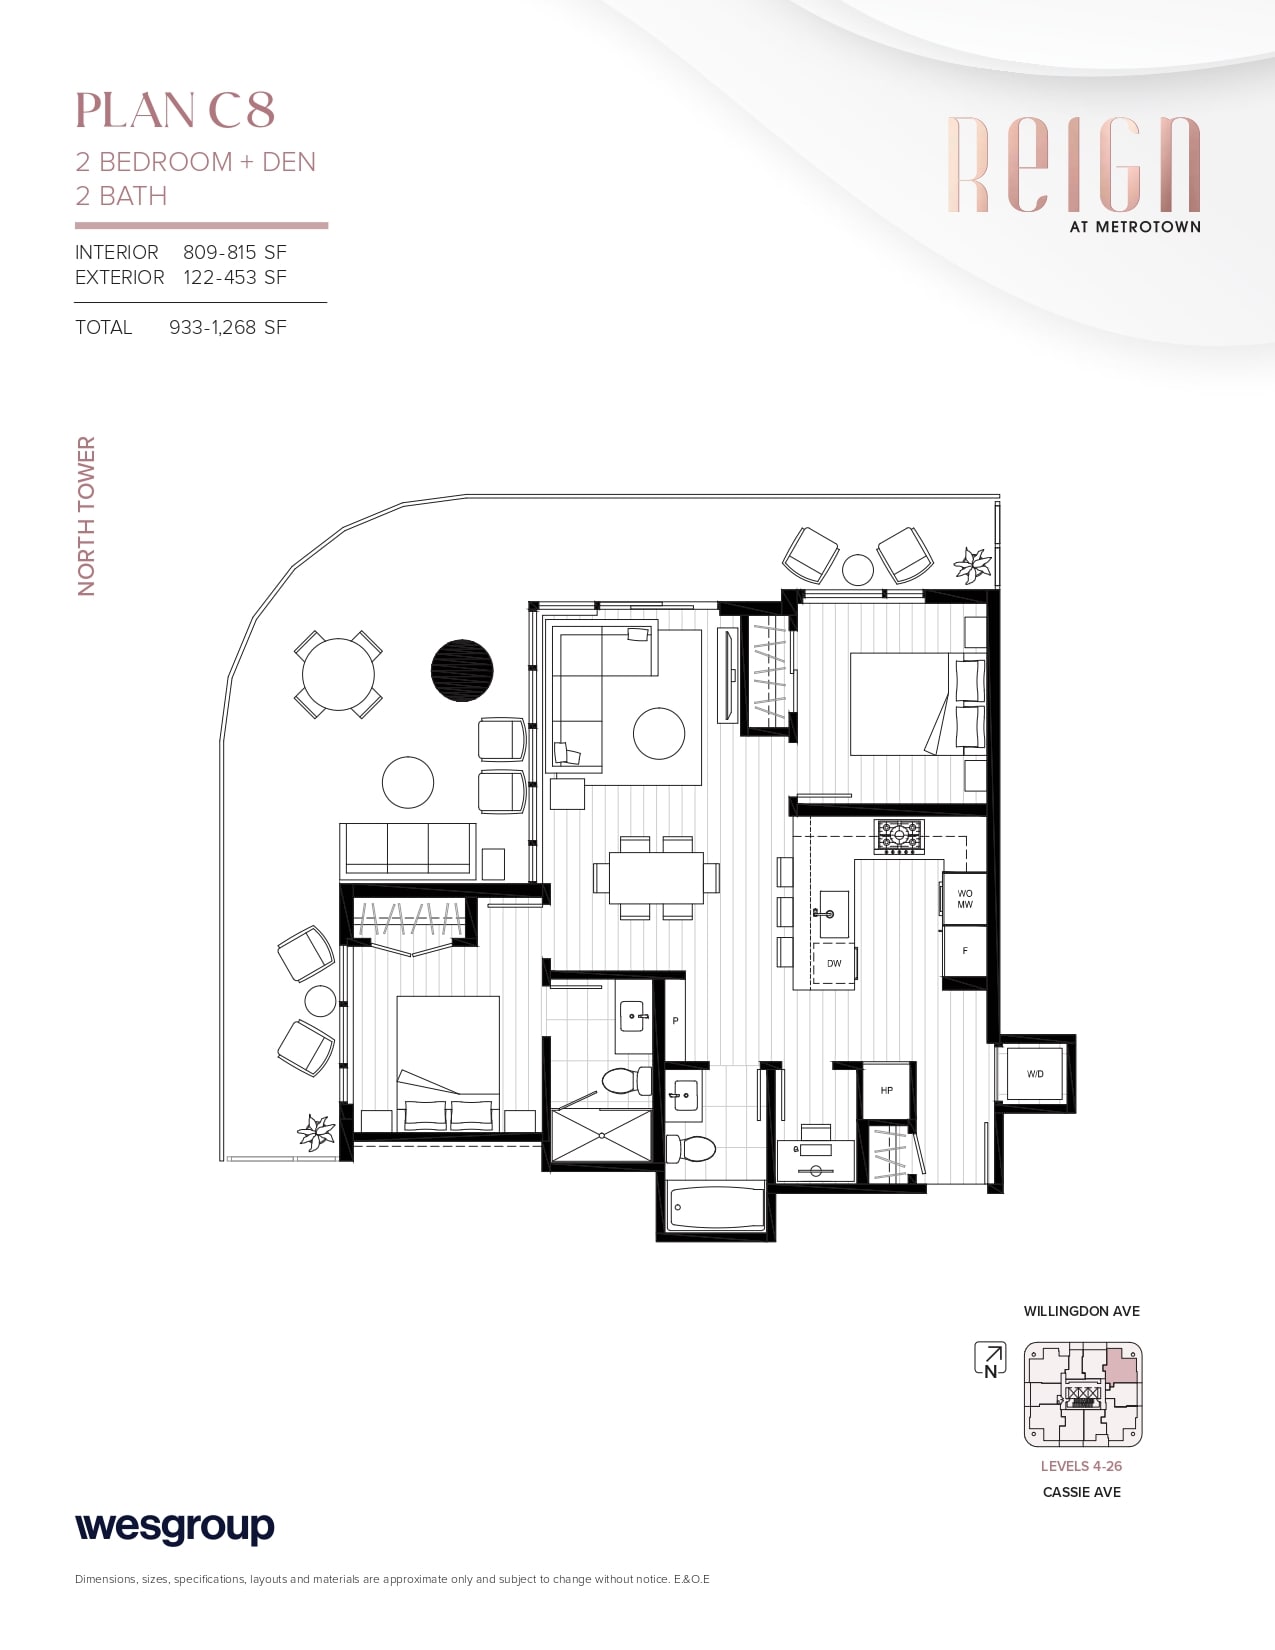 Reign_-_North_Tower_-_Typical_Floorplans_-_FINAL__page-0015-min.jpg